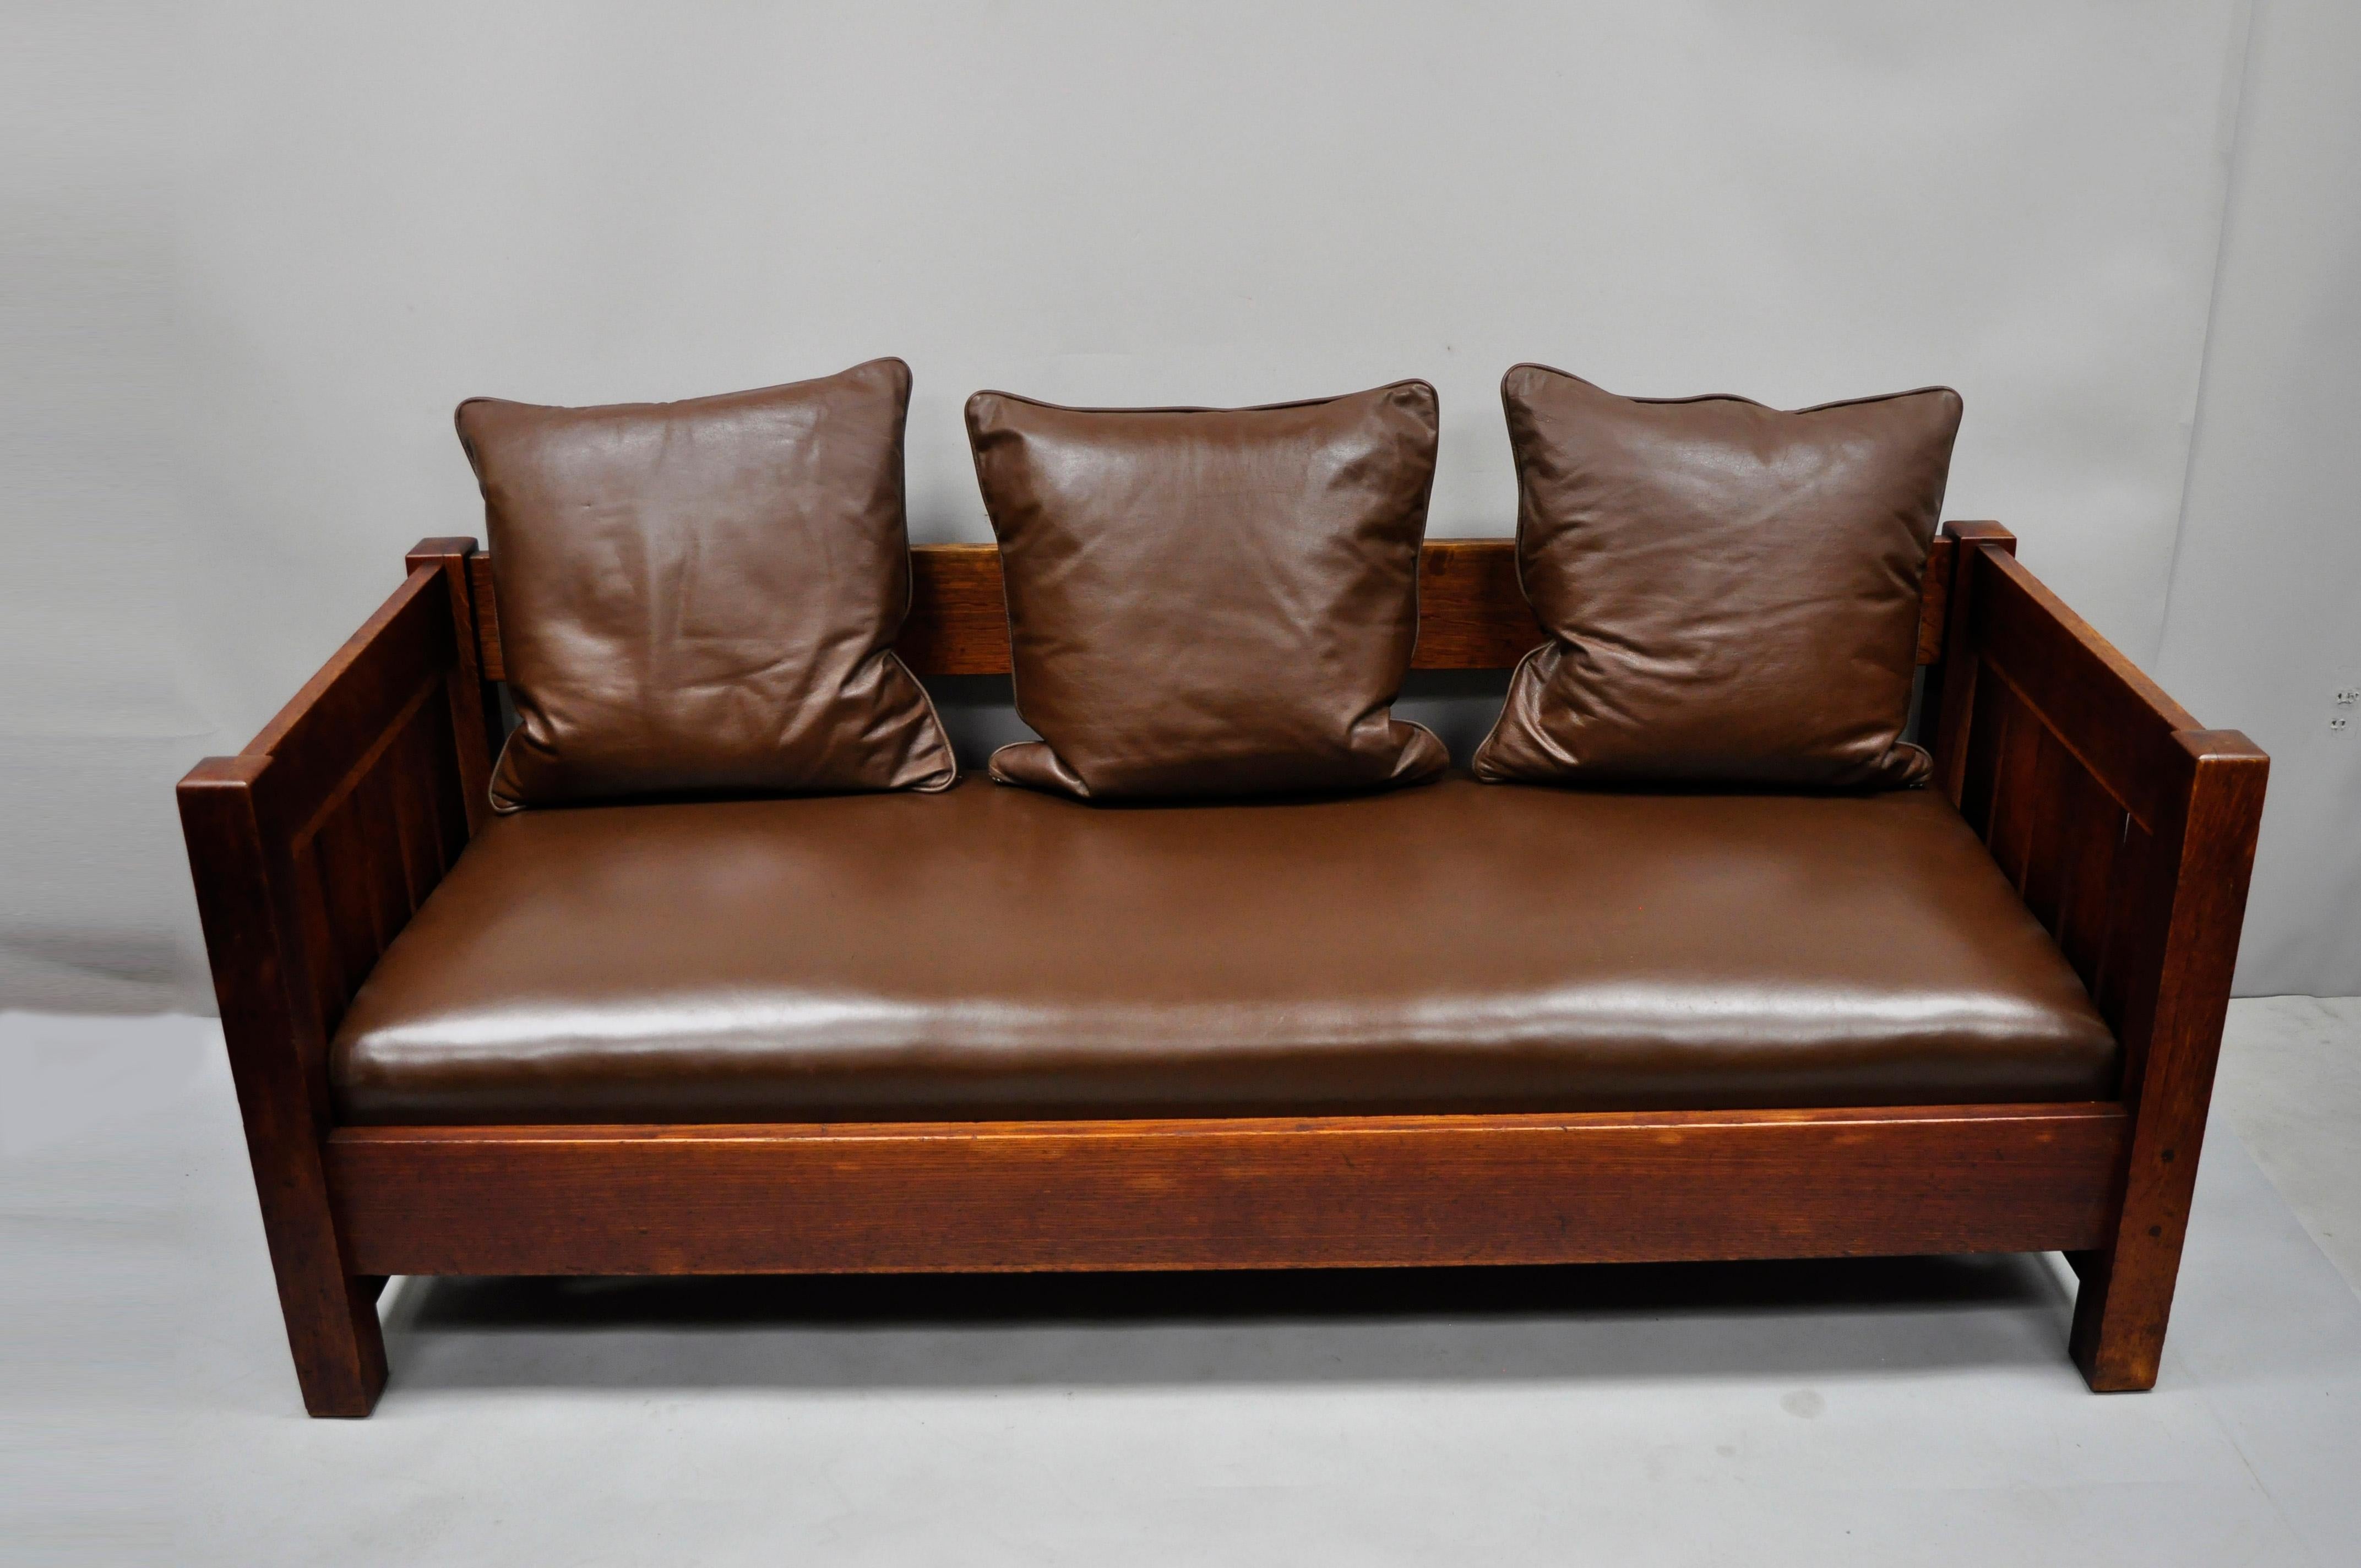 Gustav Stickley settle #225 even arm brown leather Mission oak Arts & Crafts. Item features brown leather spring seat cushion, leather pillows, model #225, five vertical slats, solid wood construction, beautiful woodgrain, original stamp, very nice